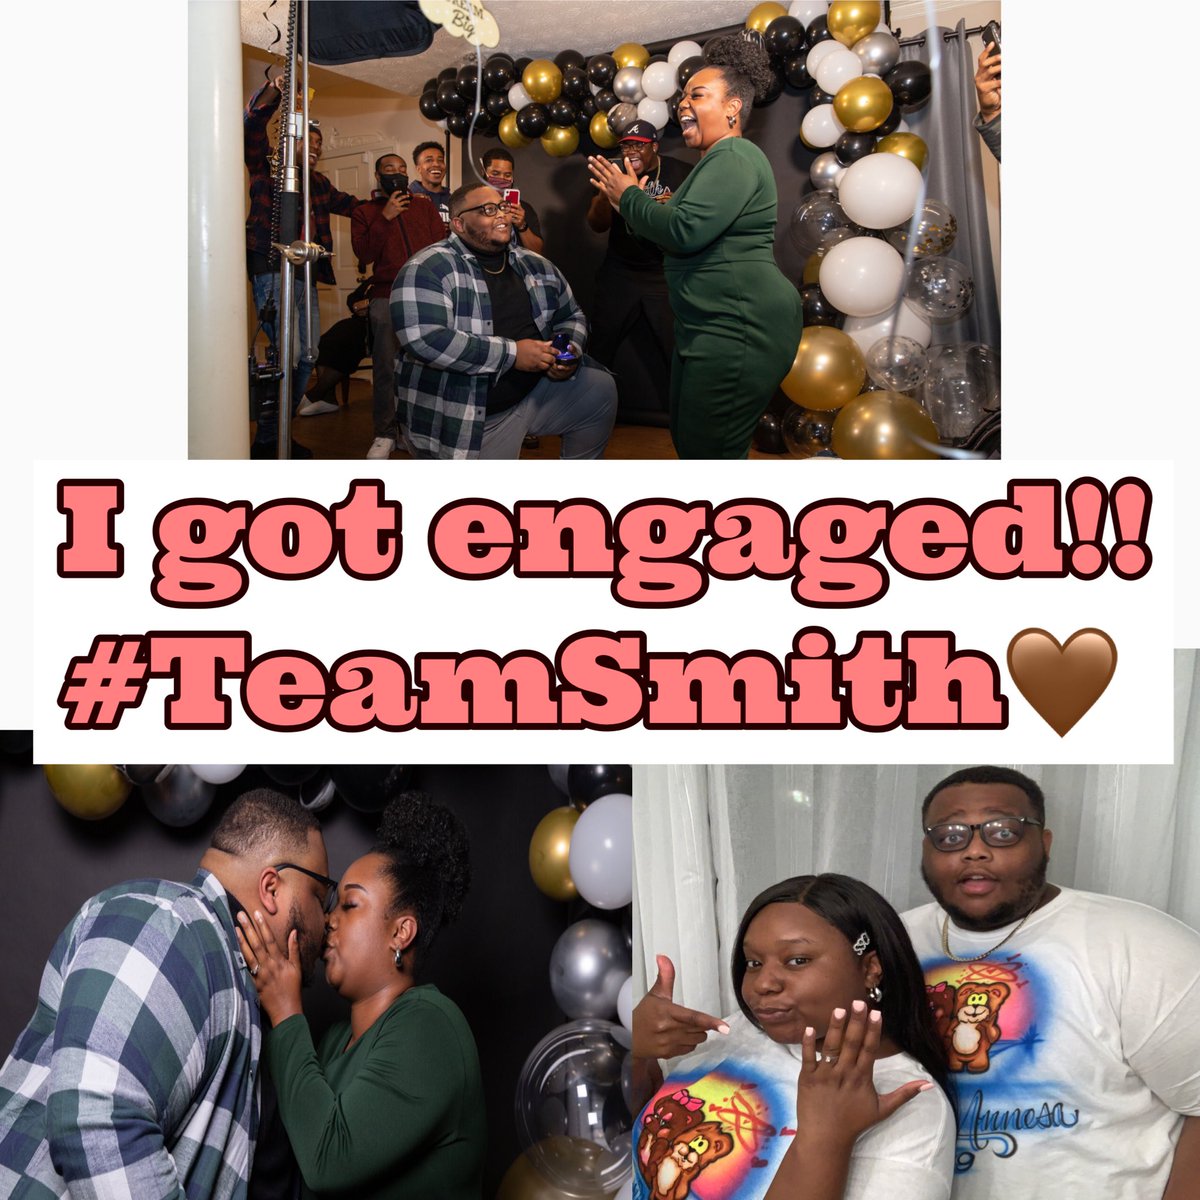 Check out our Engagement Story ! 👇🏾

THE PROPOSAL!I GOT ENGAGED!#TEAMSMITH youtu.be/OJY0U-Y2_7o